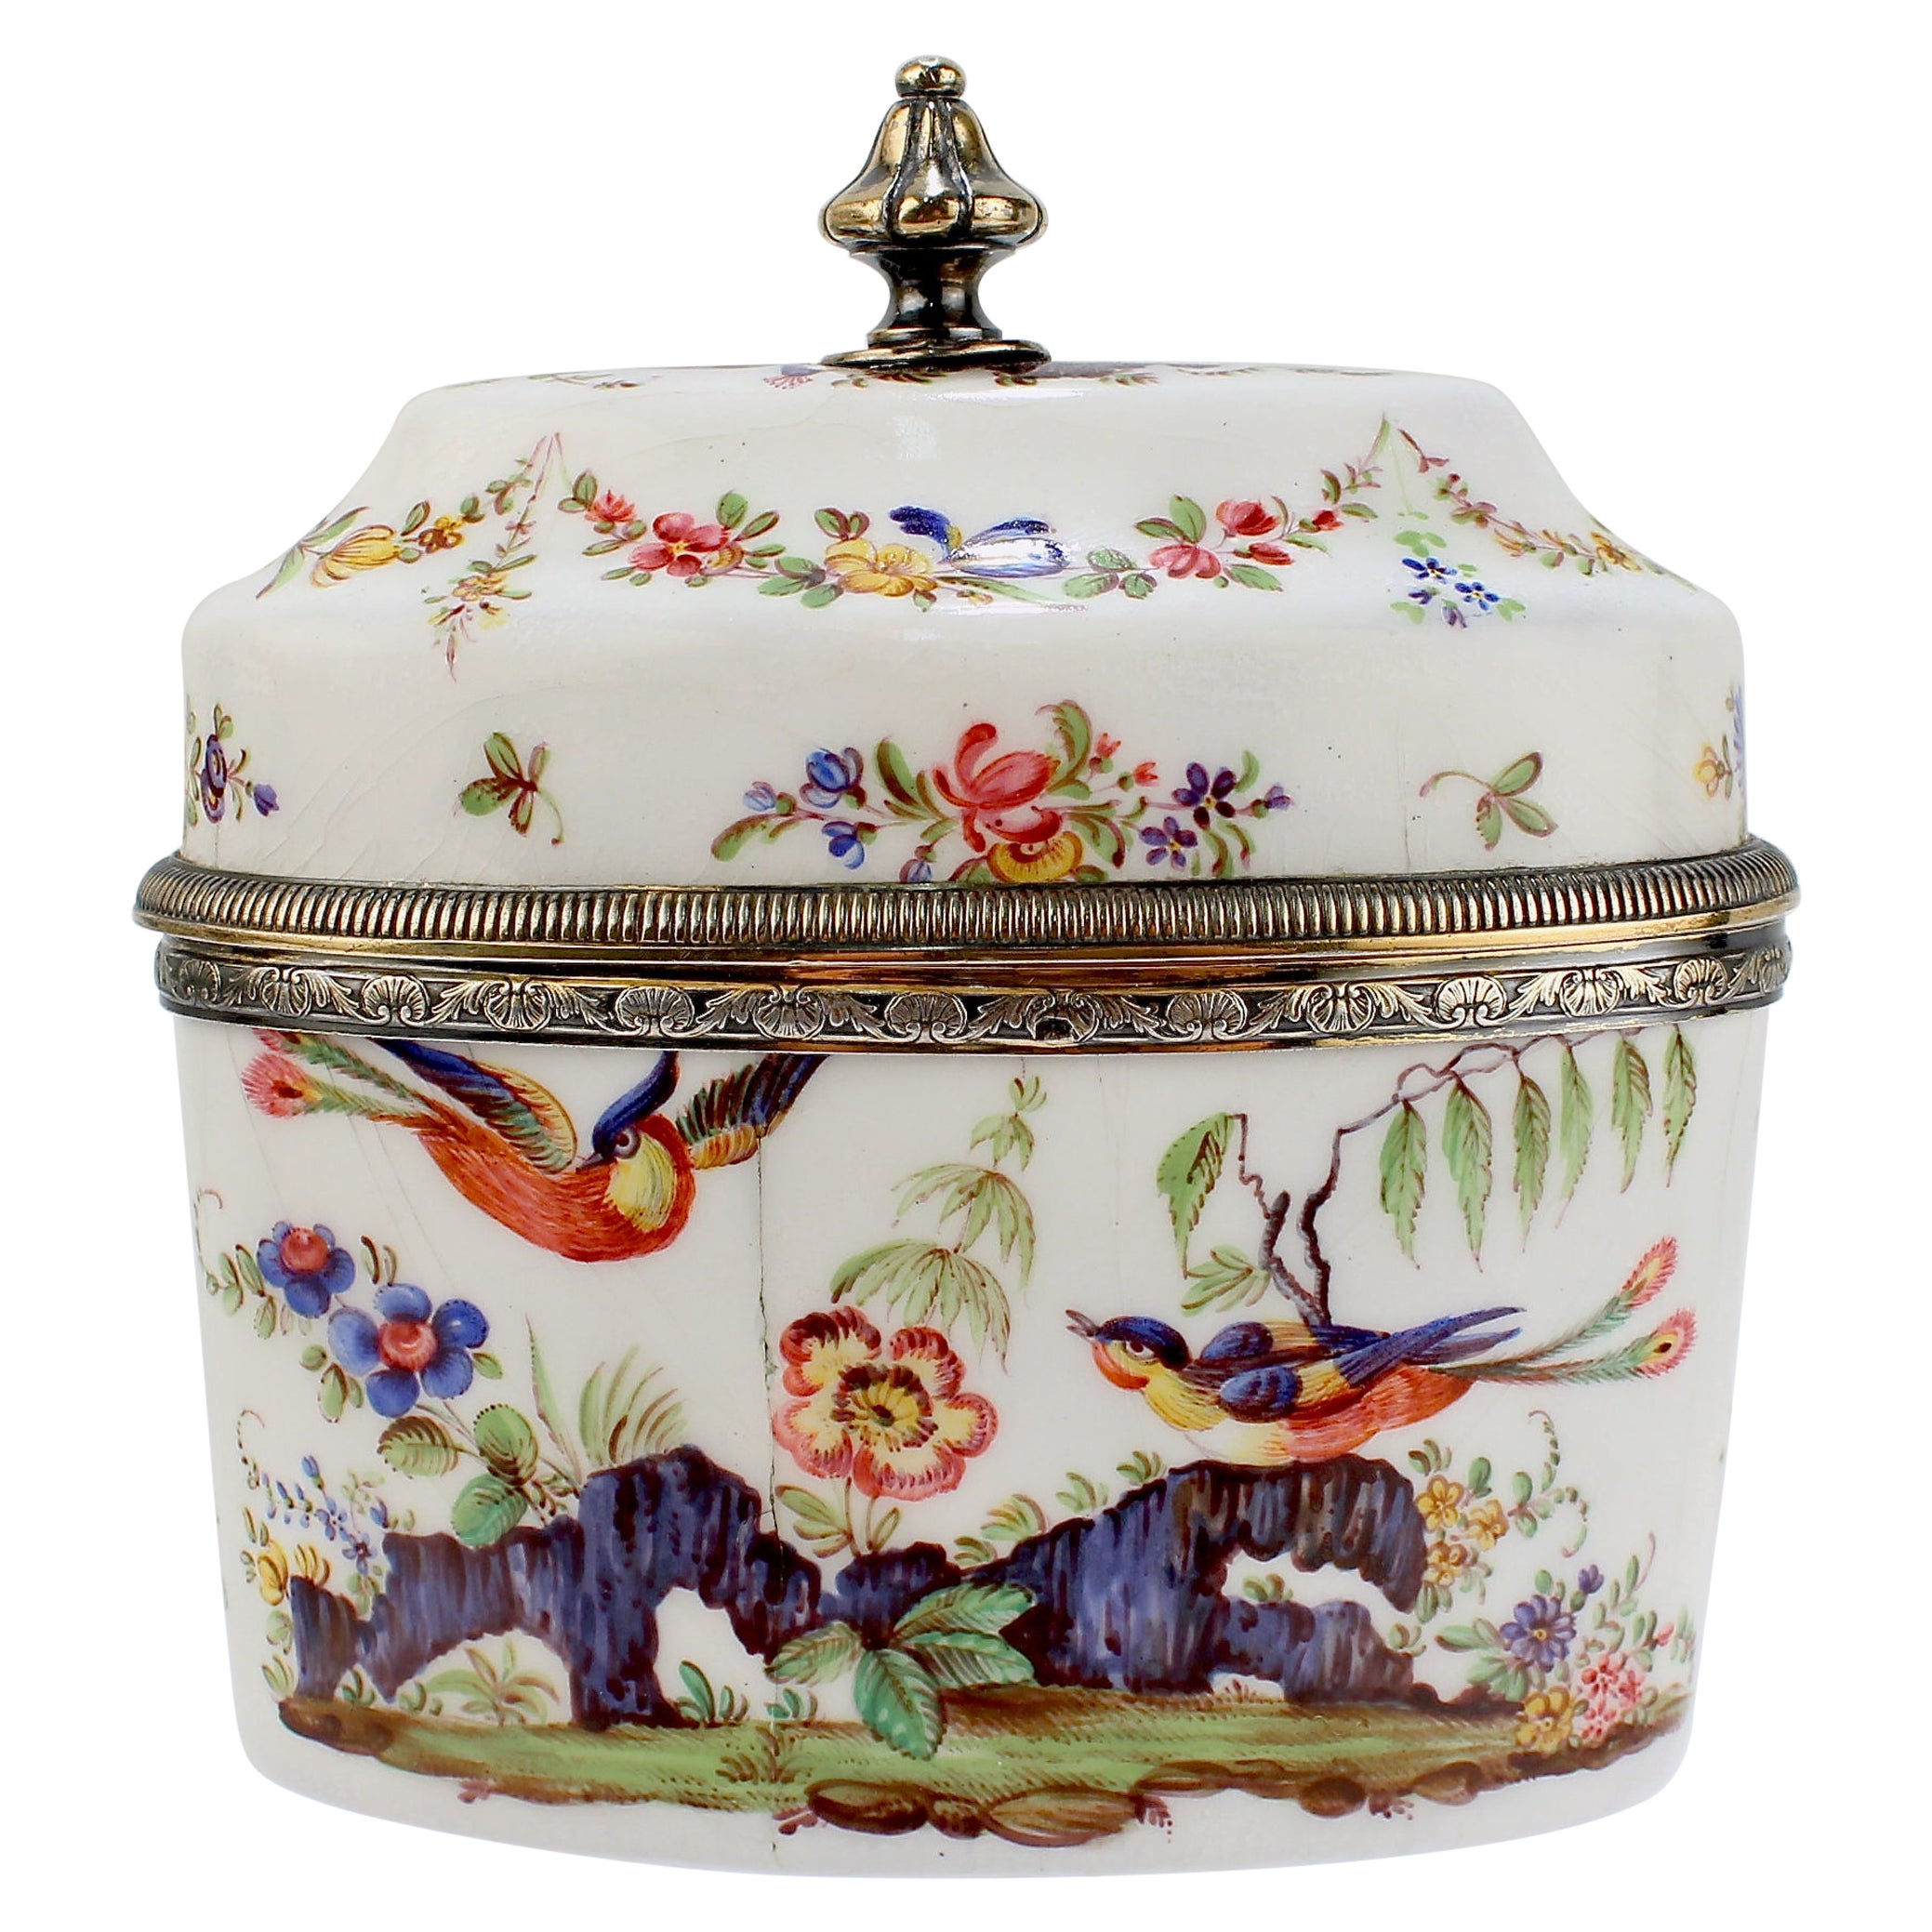 Antique 19th Century French Beaux-Arts Silver-Mounted Enamel Tea Caddy by Risler